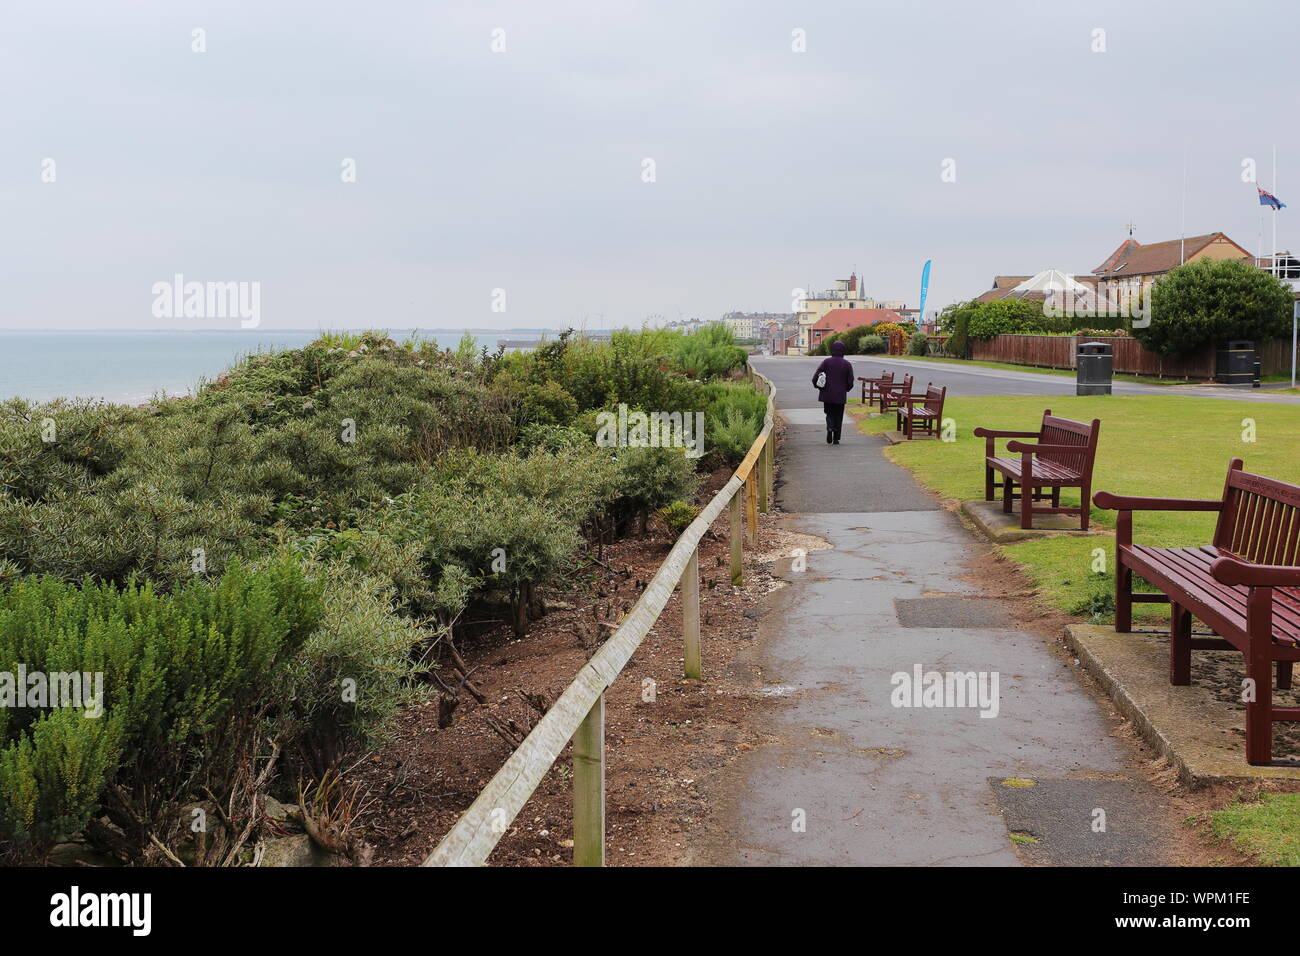 View southwards towards Bridlington harbour take from the northern resting area.  My wife is visible on the path. Stock Photo